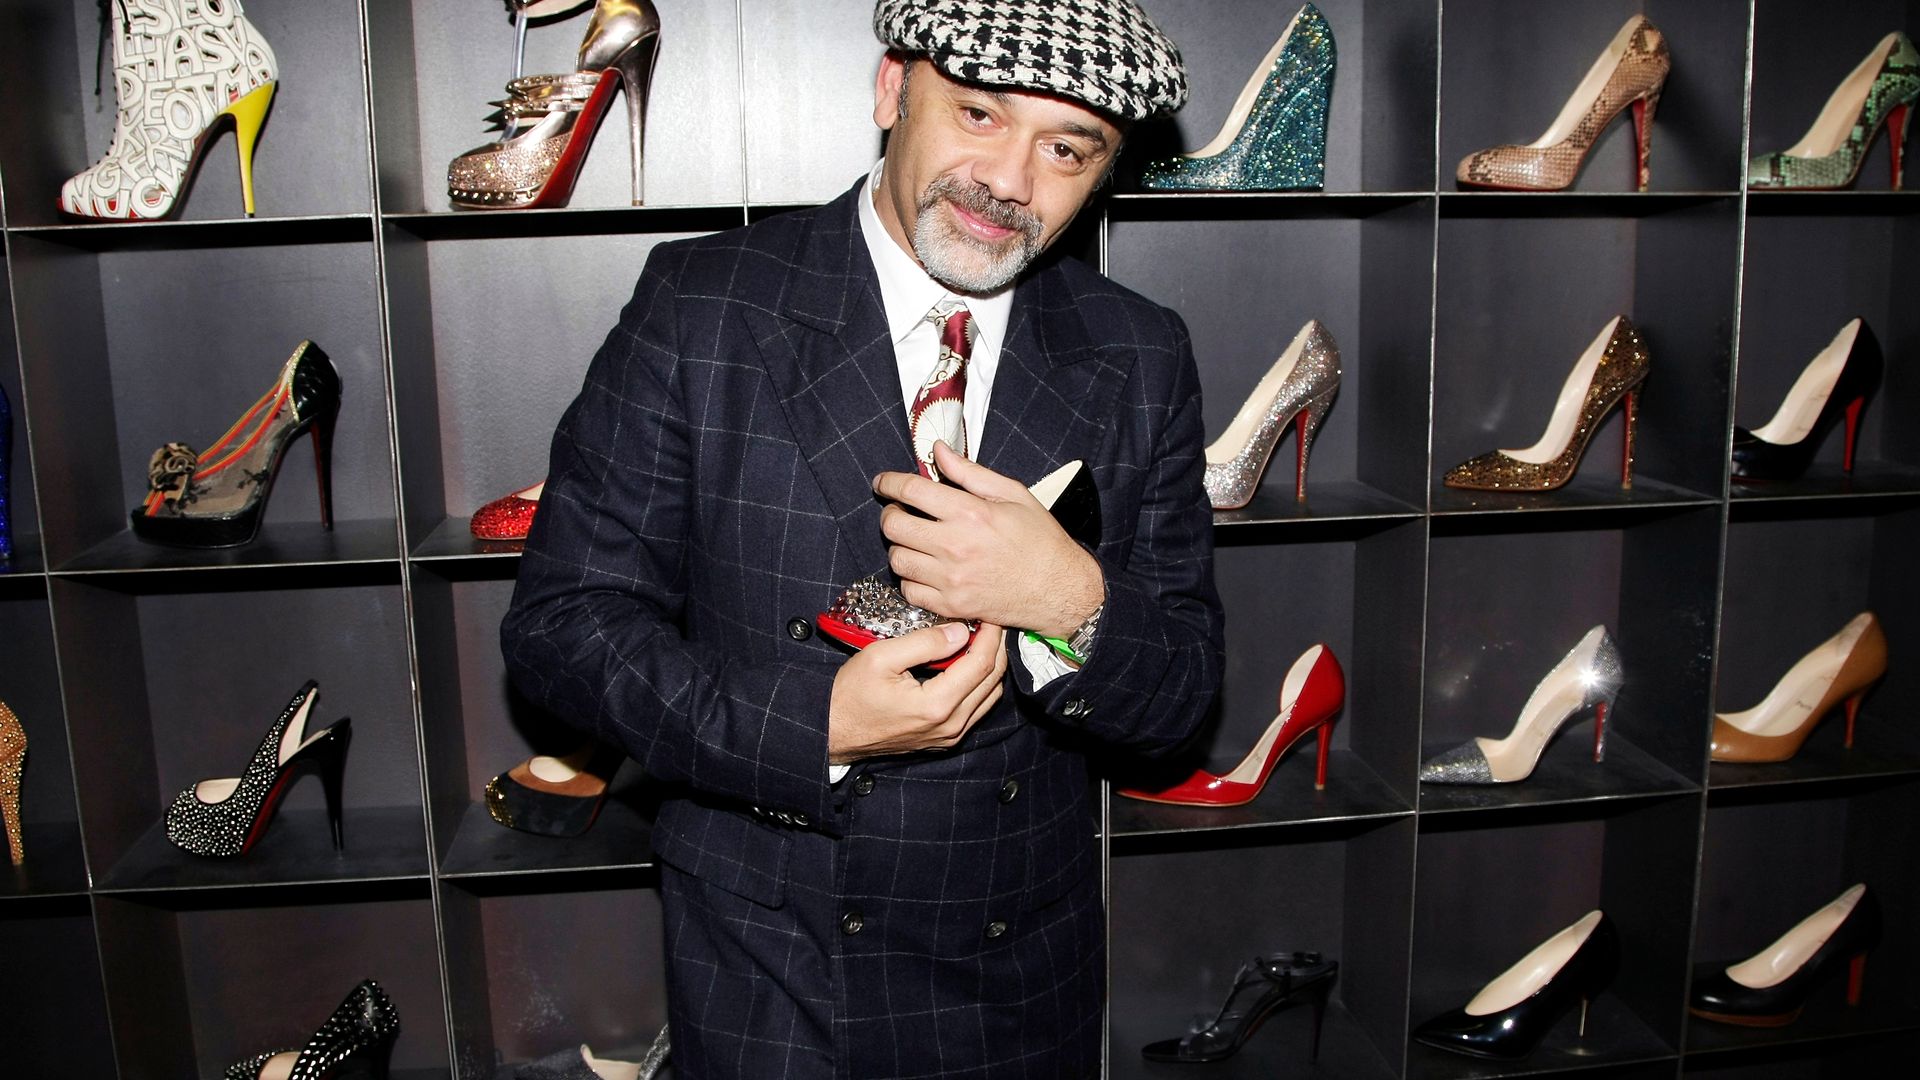 Christian Louboutin at one of his shoe shops